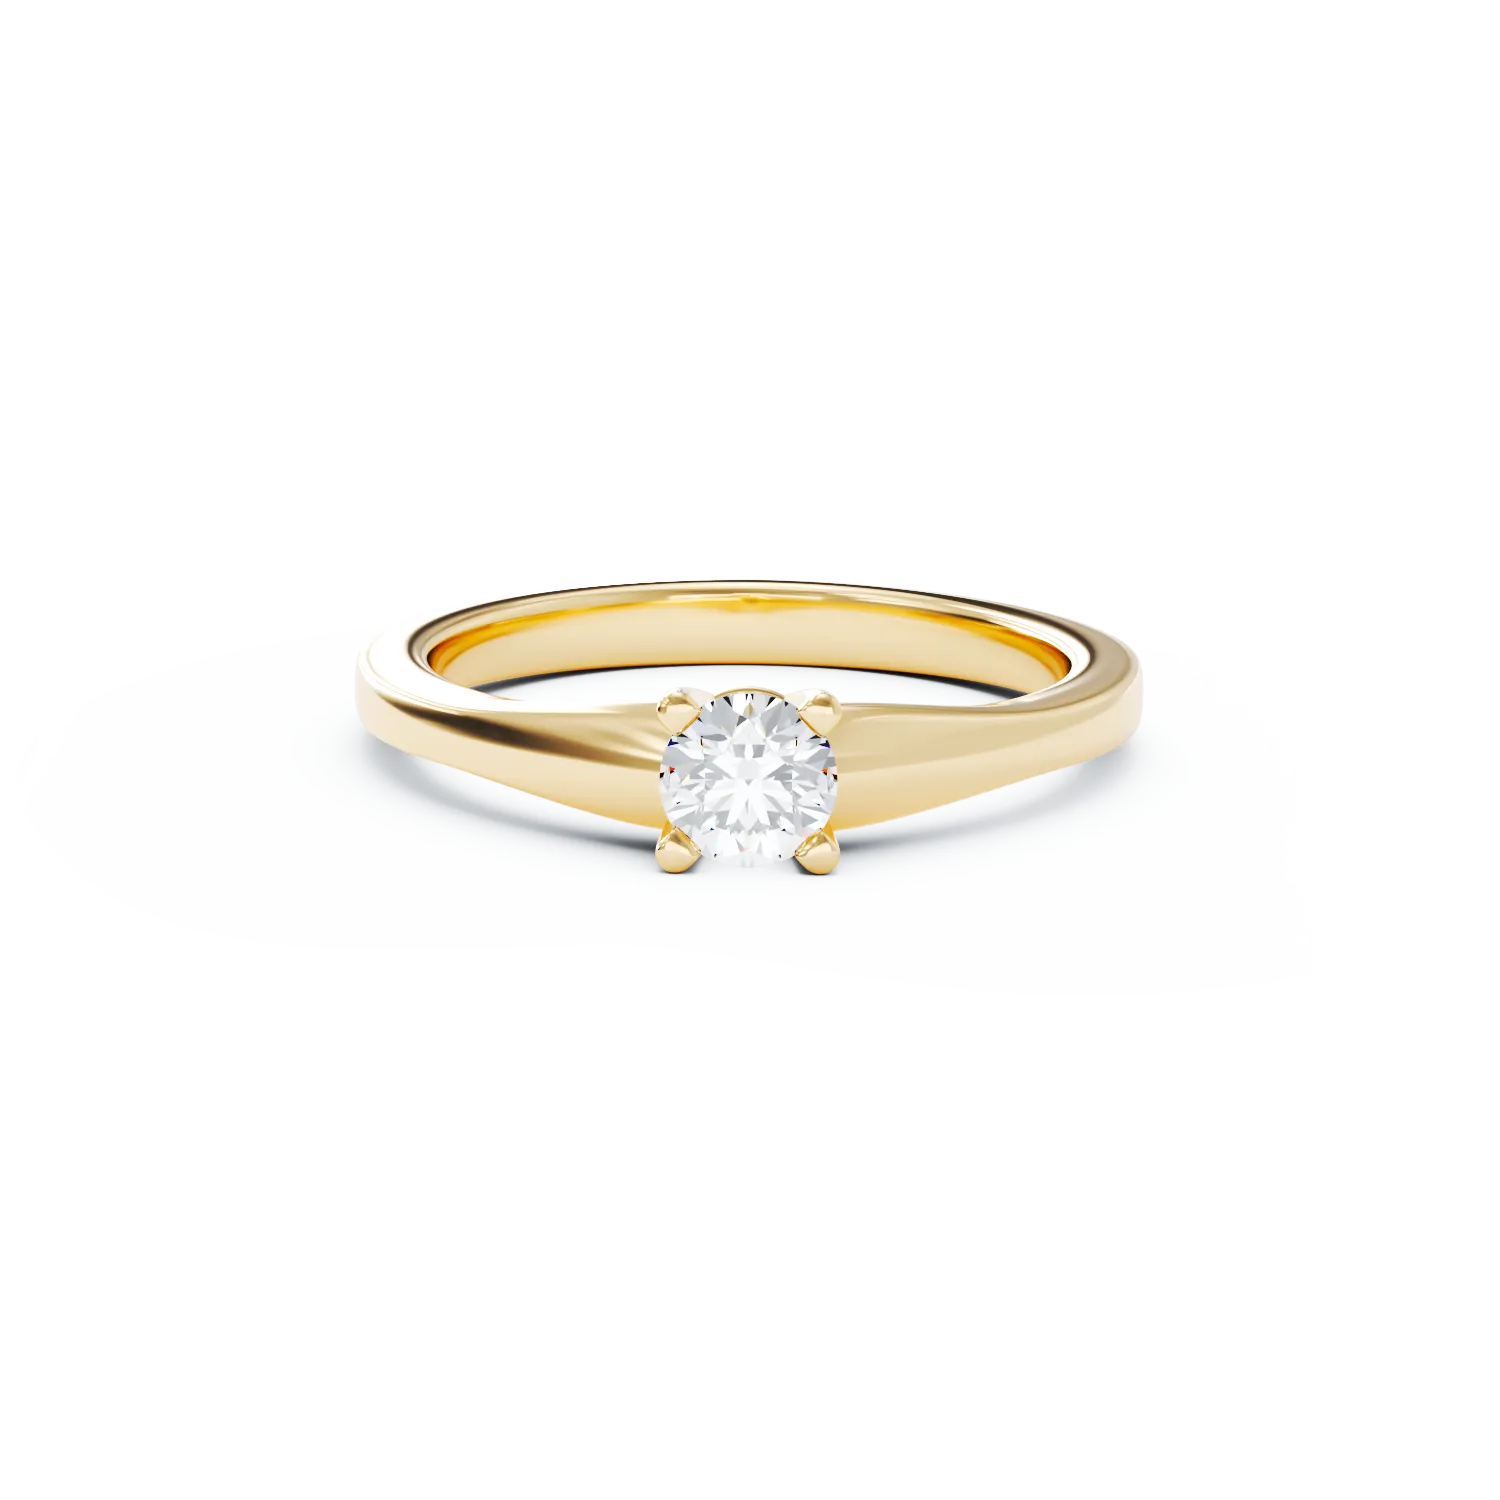 18K yellow gold engagement ring with 0.31ct diamond